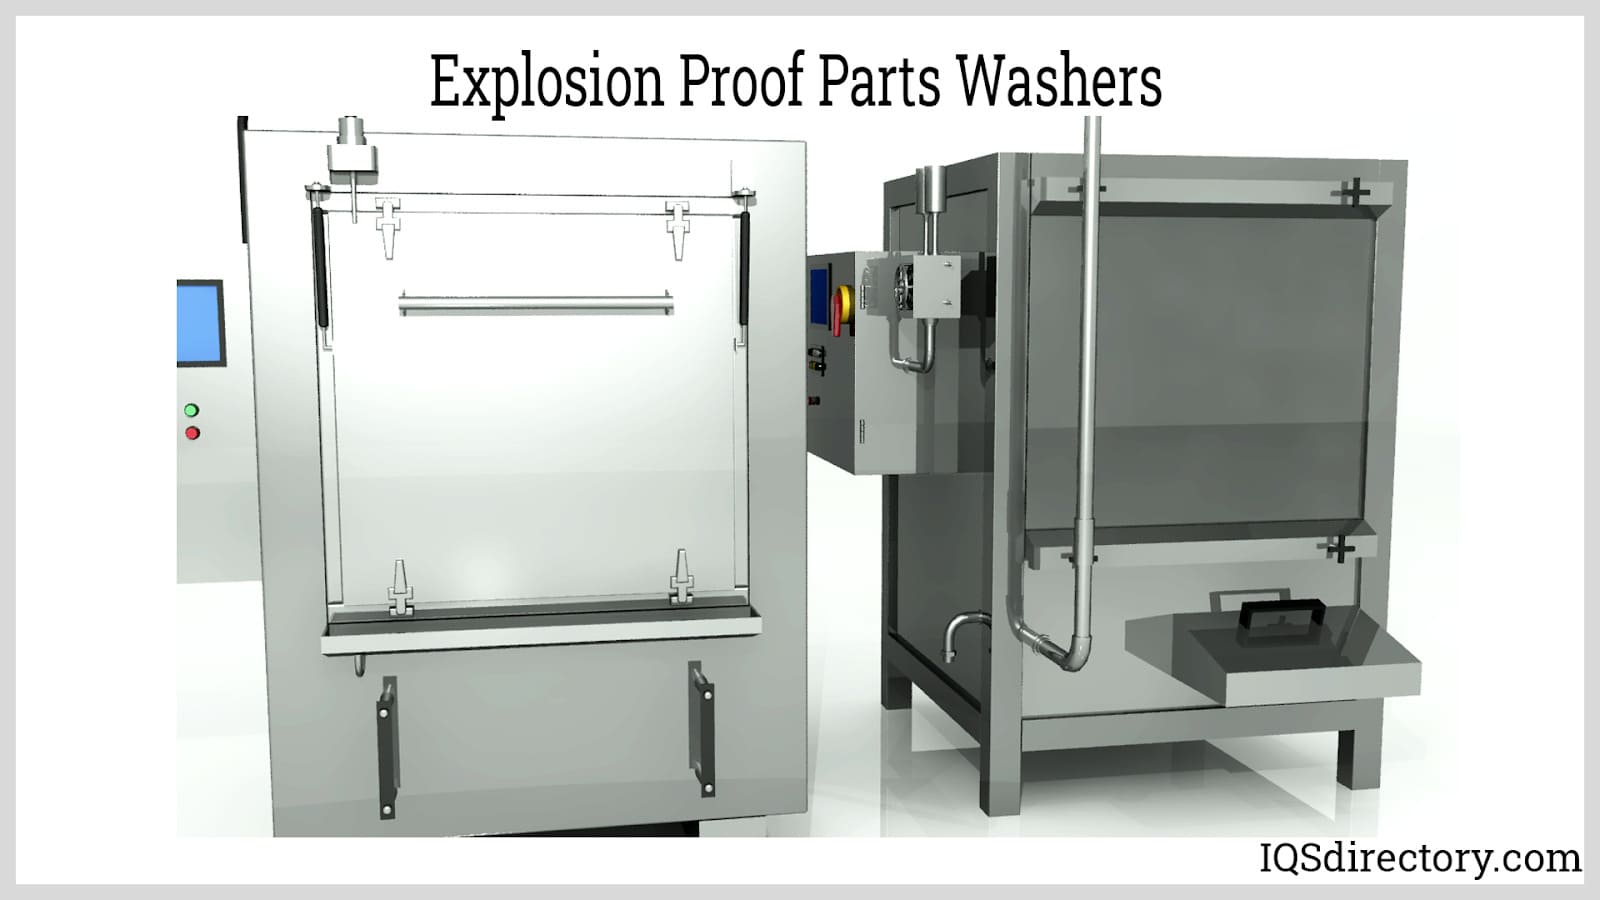 Explosion Proof Parts Washers